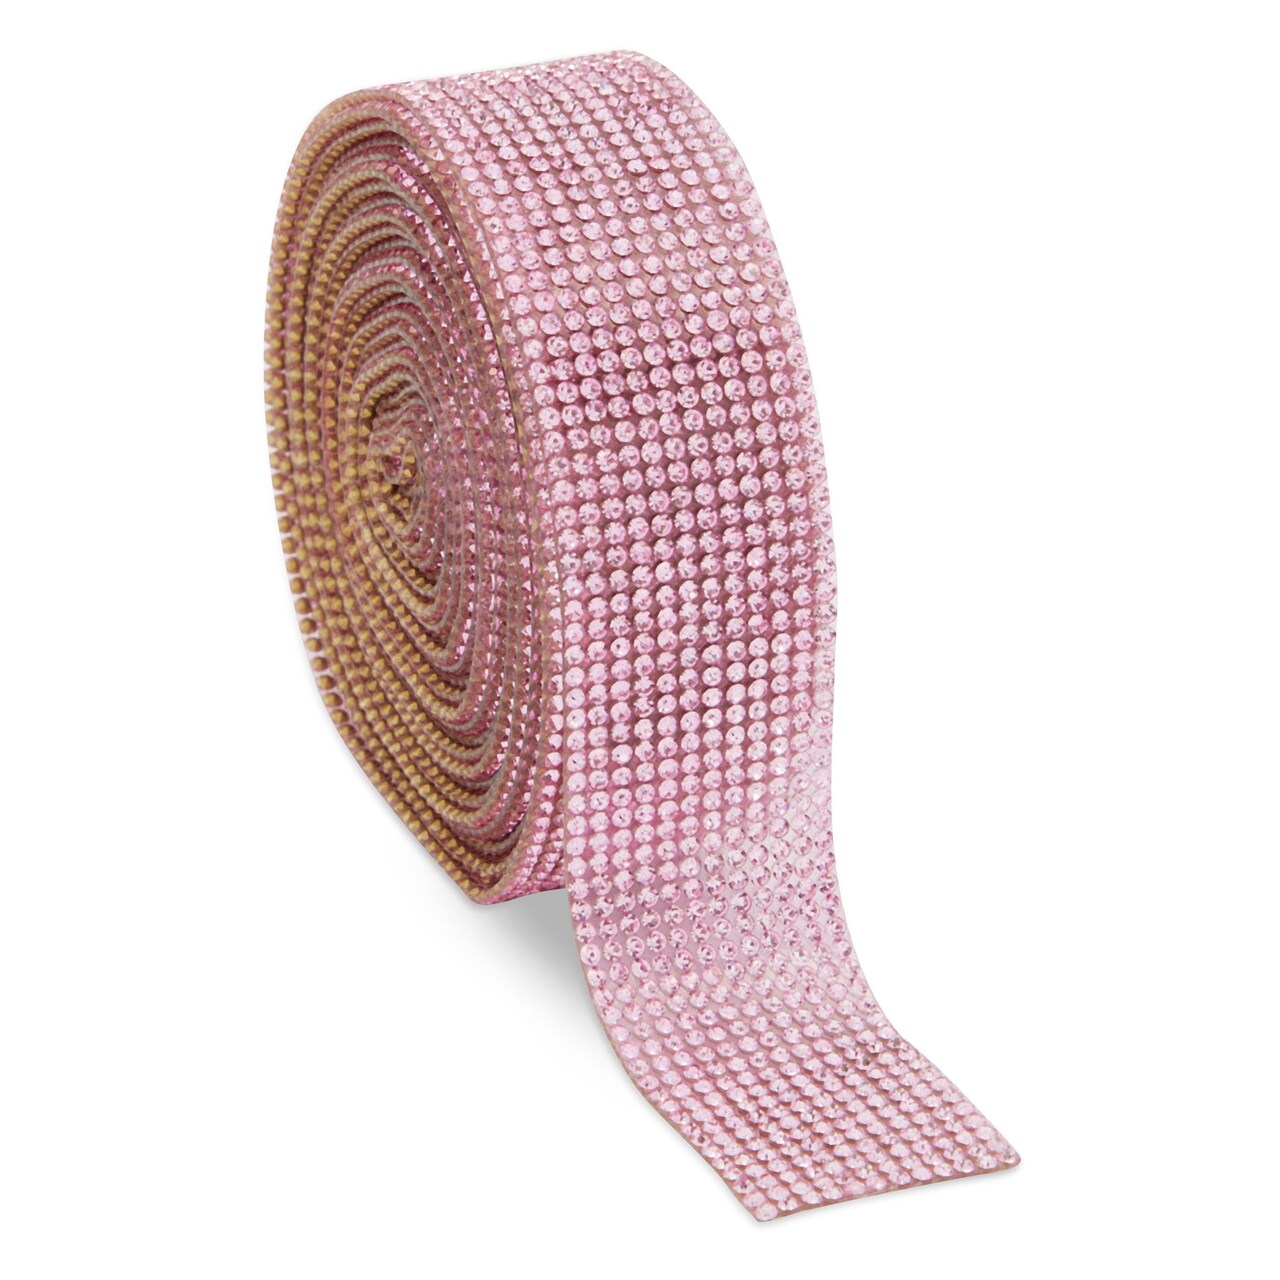 4 Yards Pink Rhinestone Ribbon Roll for Crafts, 1 in Bling Wrap DIY  Decorations Wedding & Event